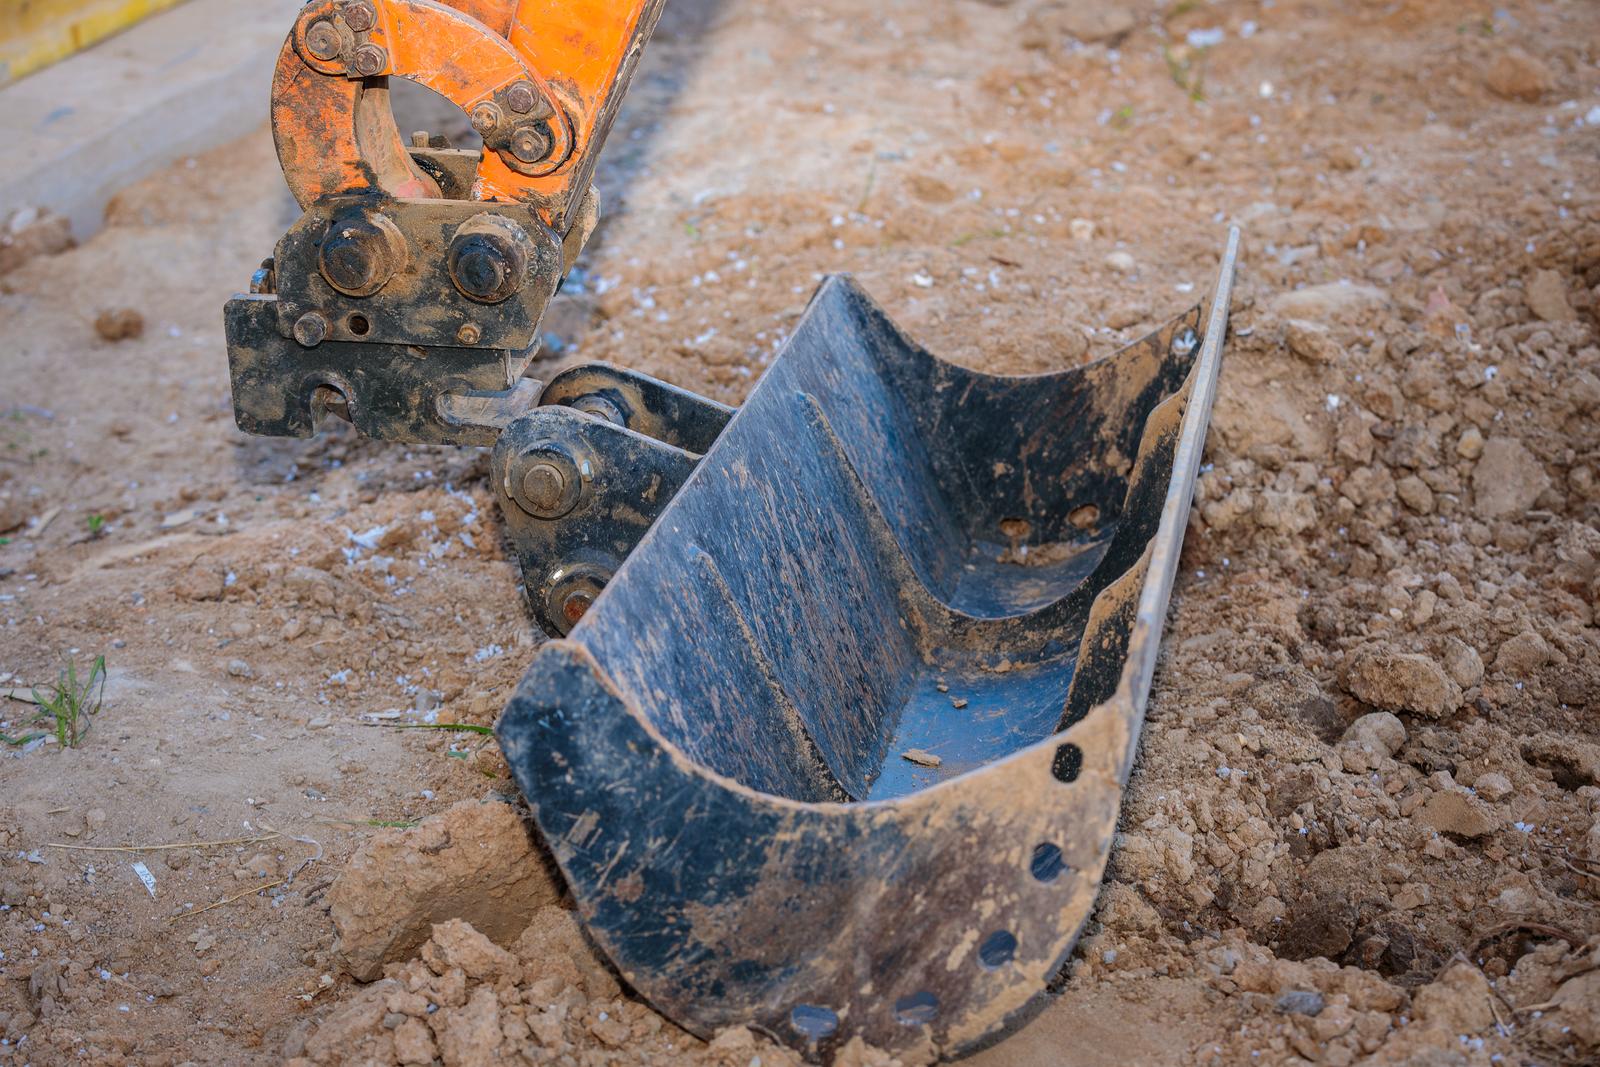 Repair of the excavator bucket, replacement of the nozzle on the boom